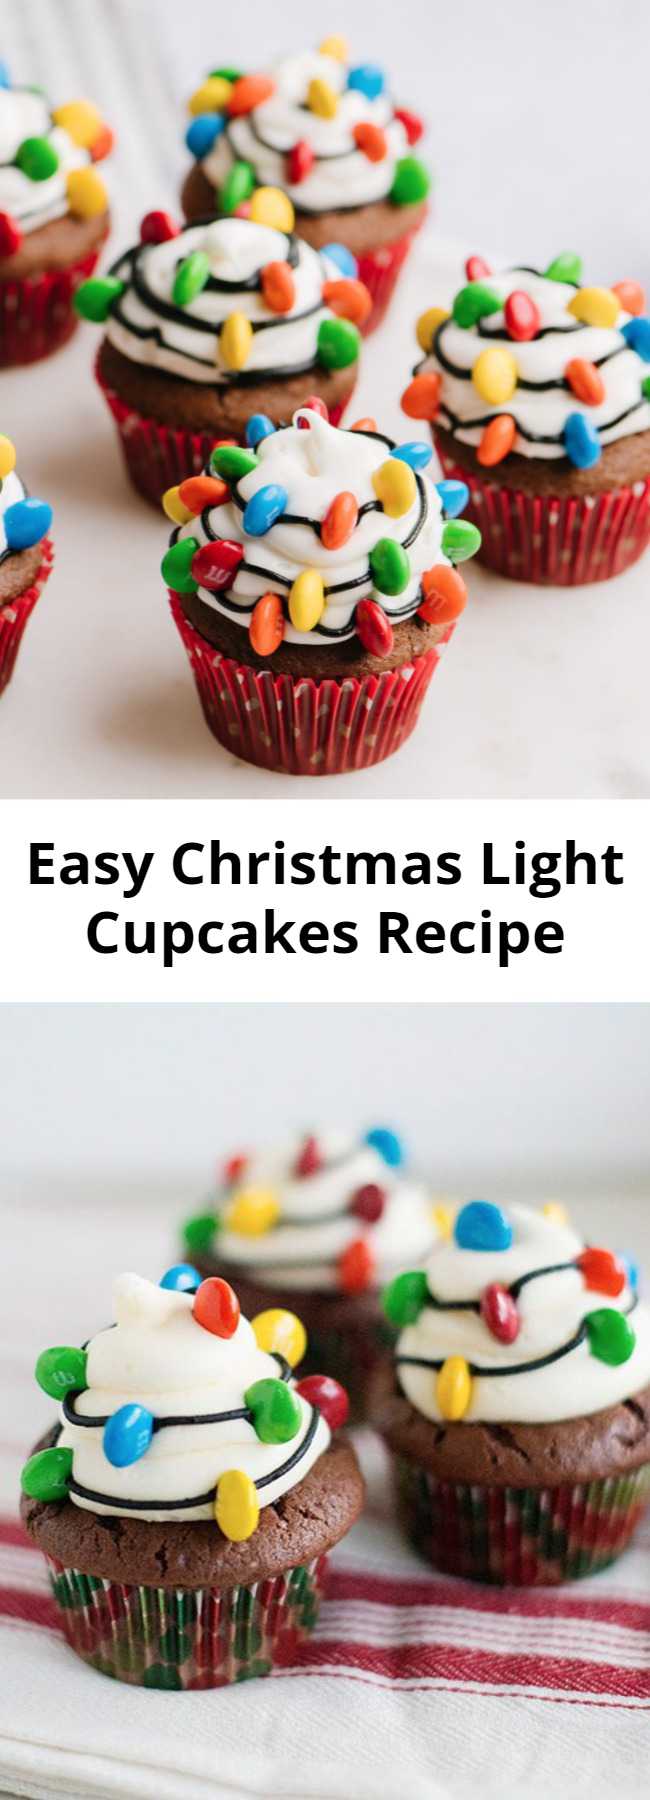 Easy Christmas Light Cupcakes Recipe - These Christmas Light Cupcakes are made with an embellished chocolate cake mix and the best vanilla buttercream frosting. They are adorable for Christmas and perfect for bake sales.